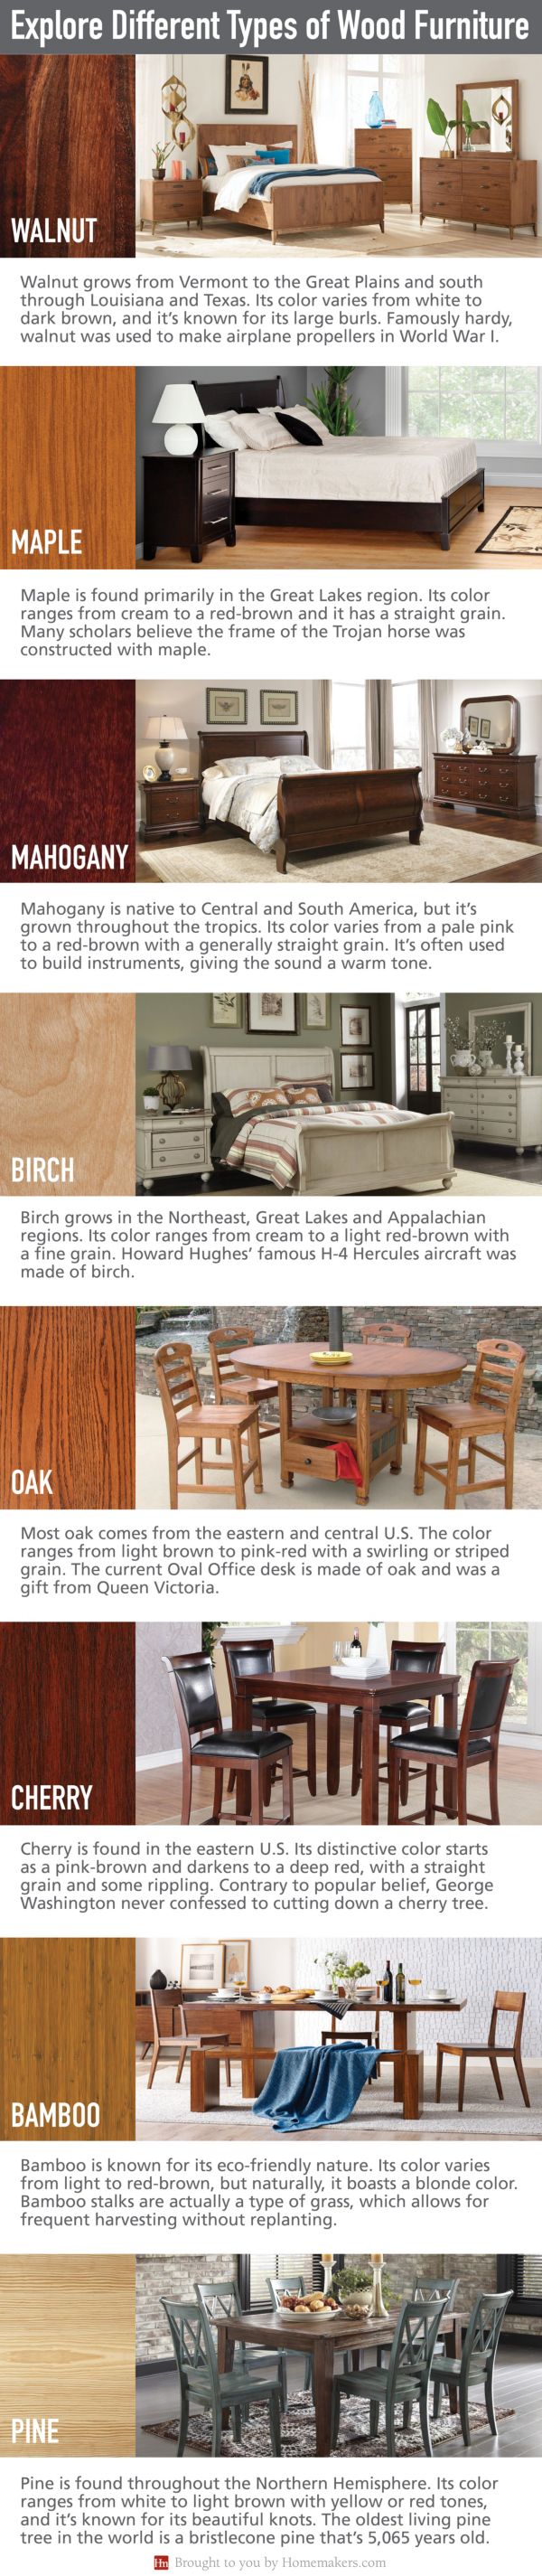 Best Types Of Wood For Furniture Homemakers